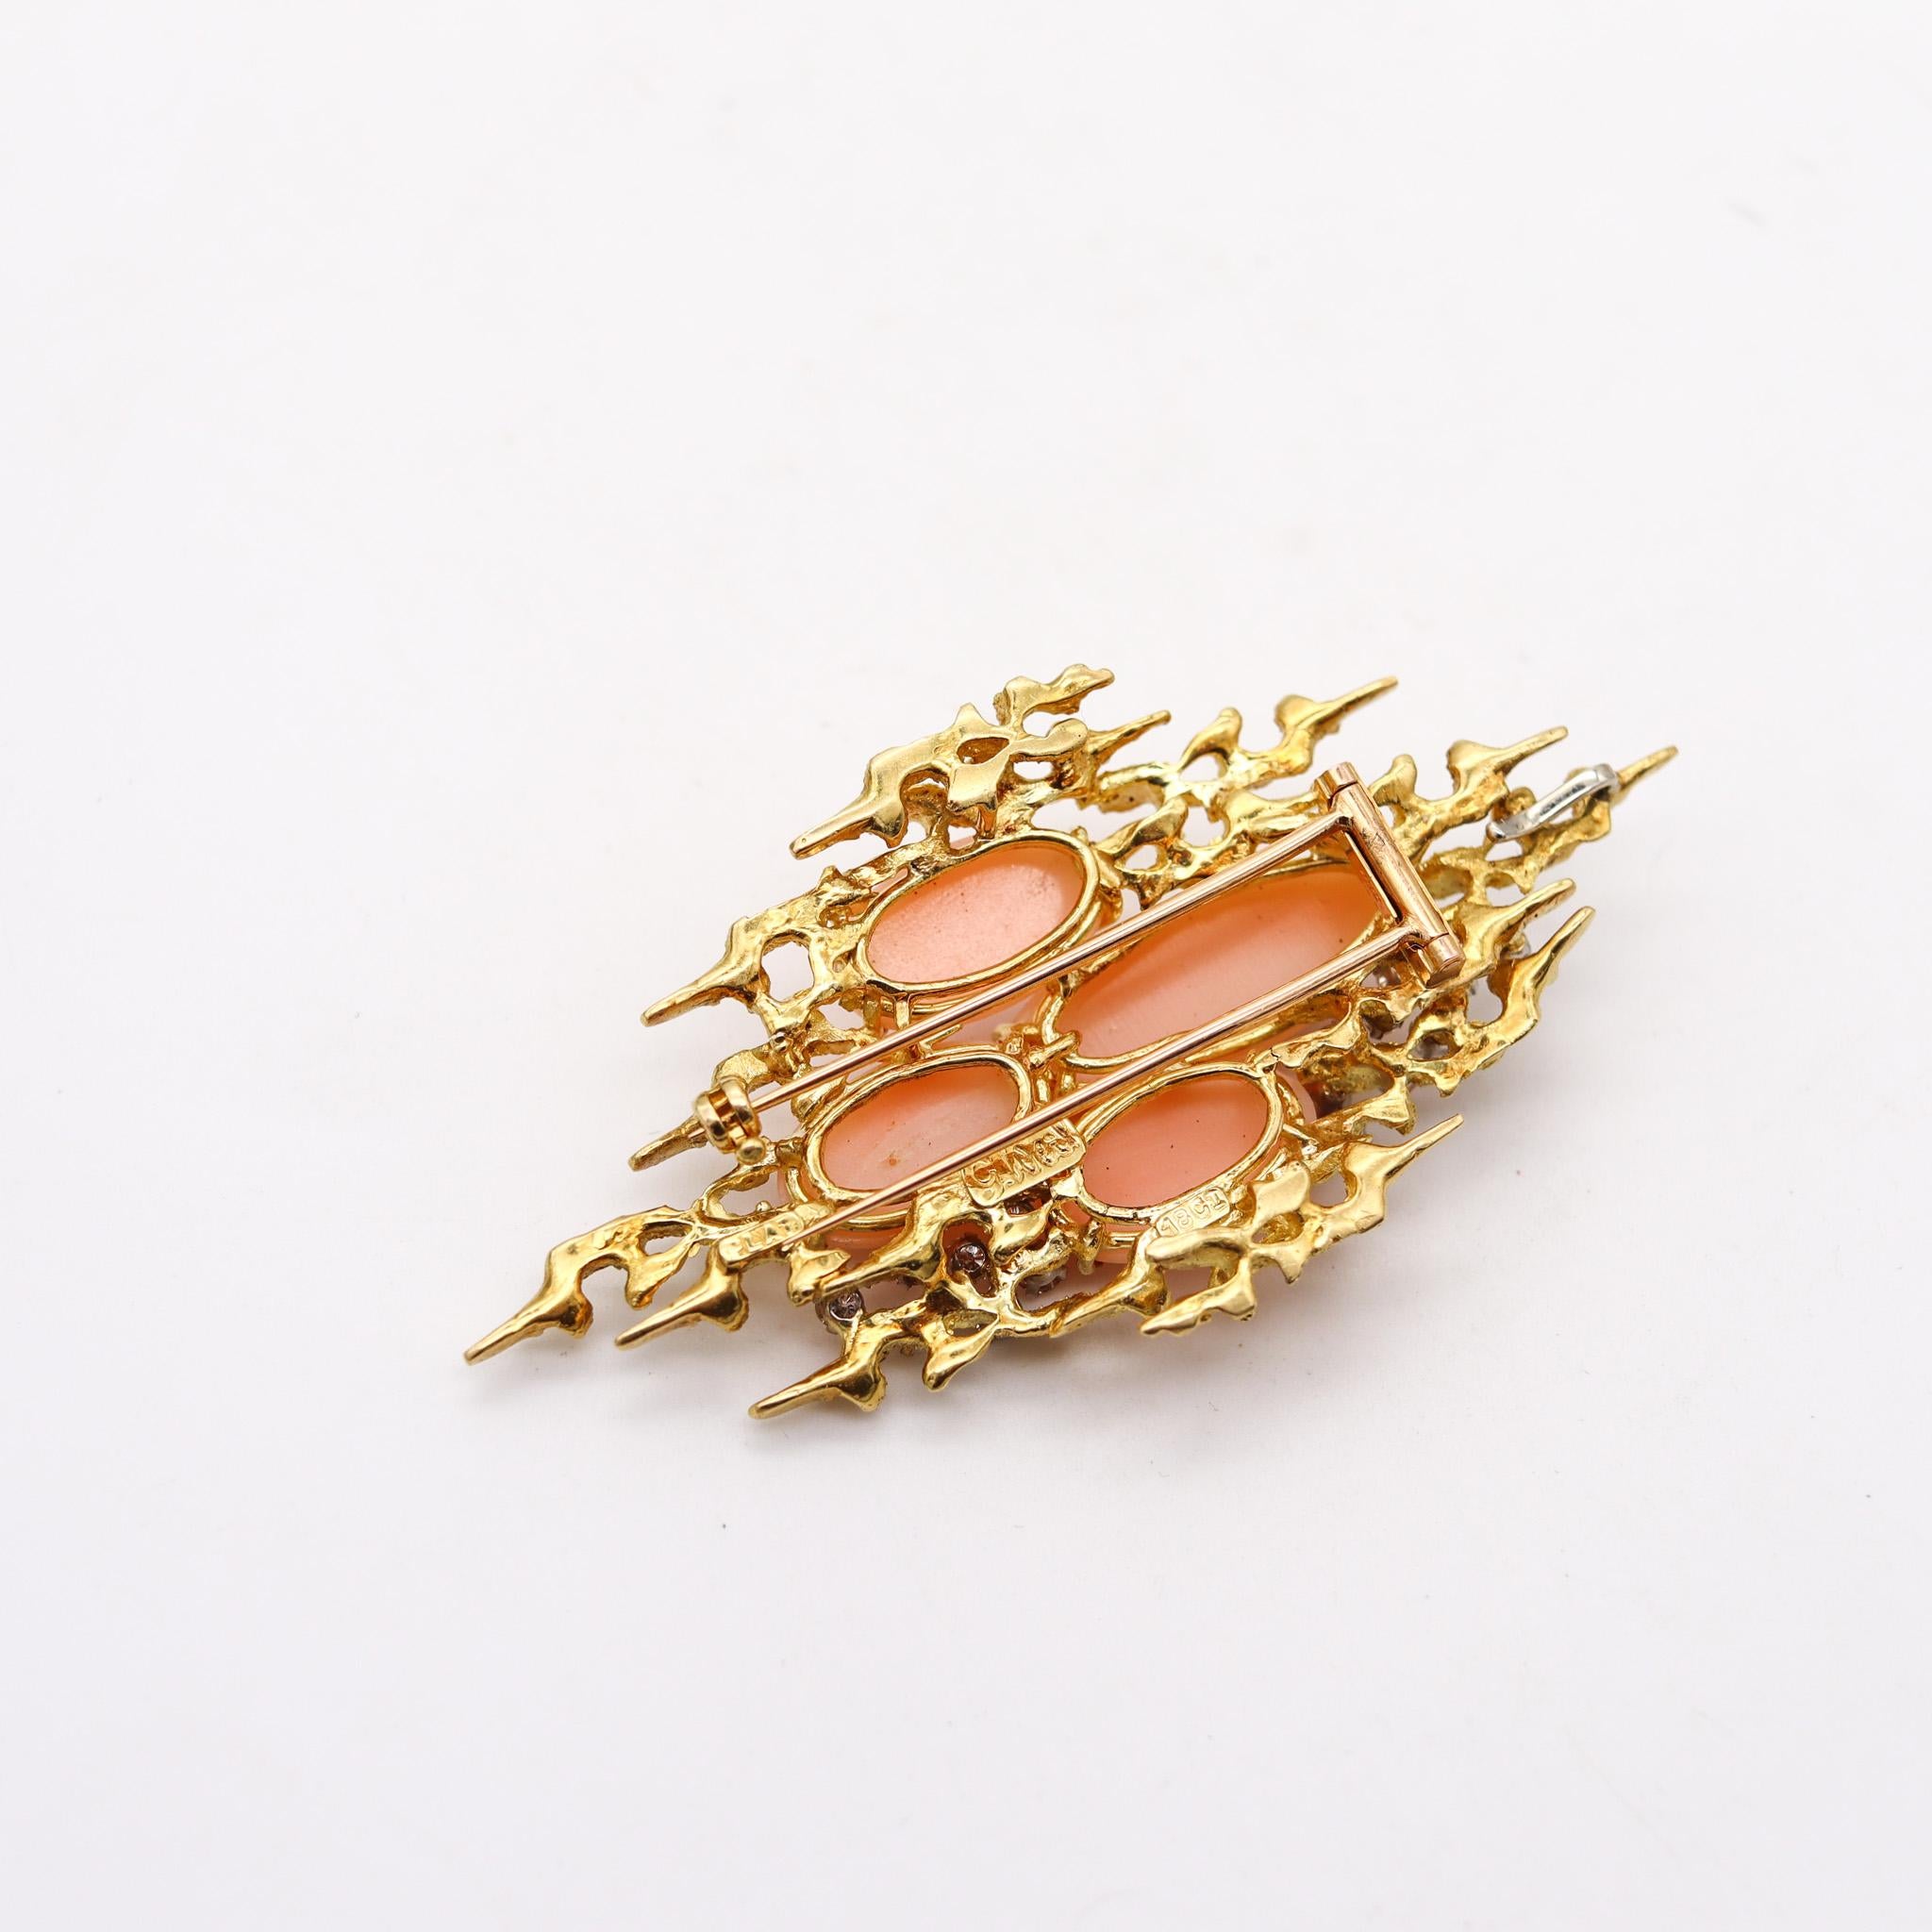 Modernist George Weil 1960 Brutalist Pendant Brooch In 18Kt Gold Diamonds And Corals For Sale